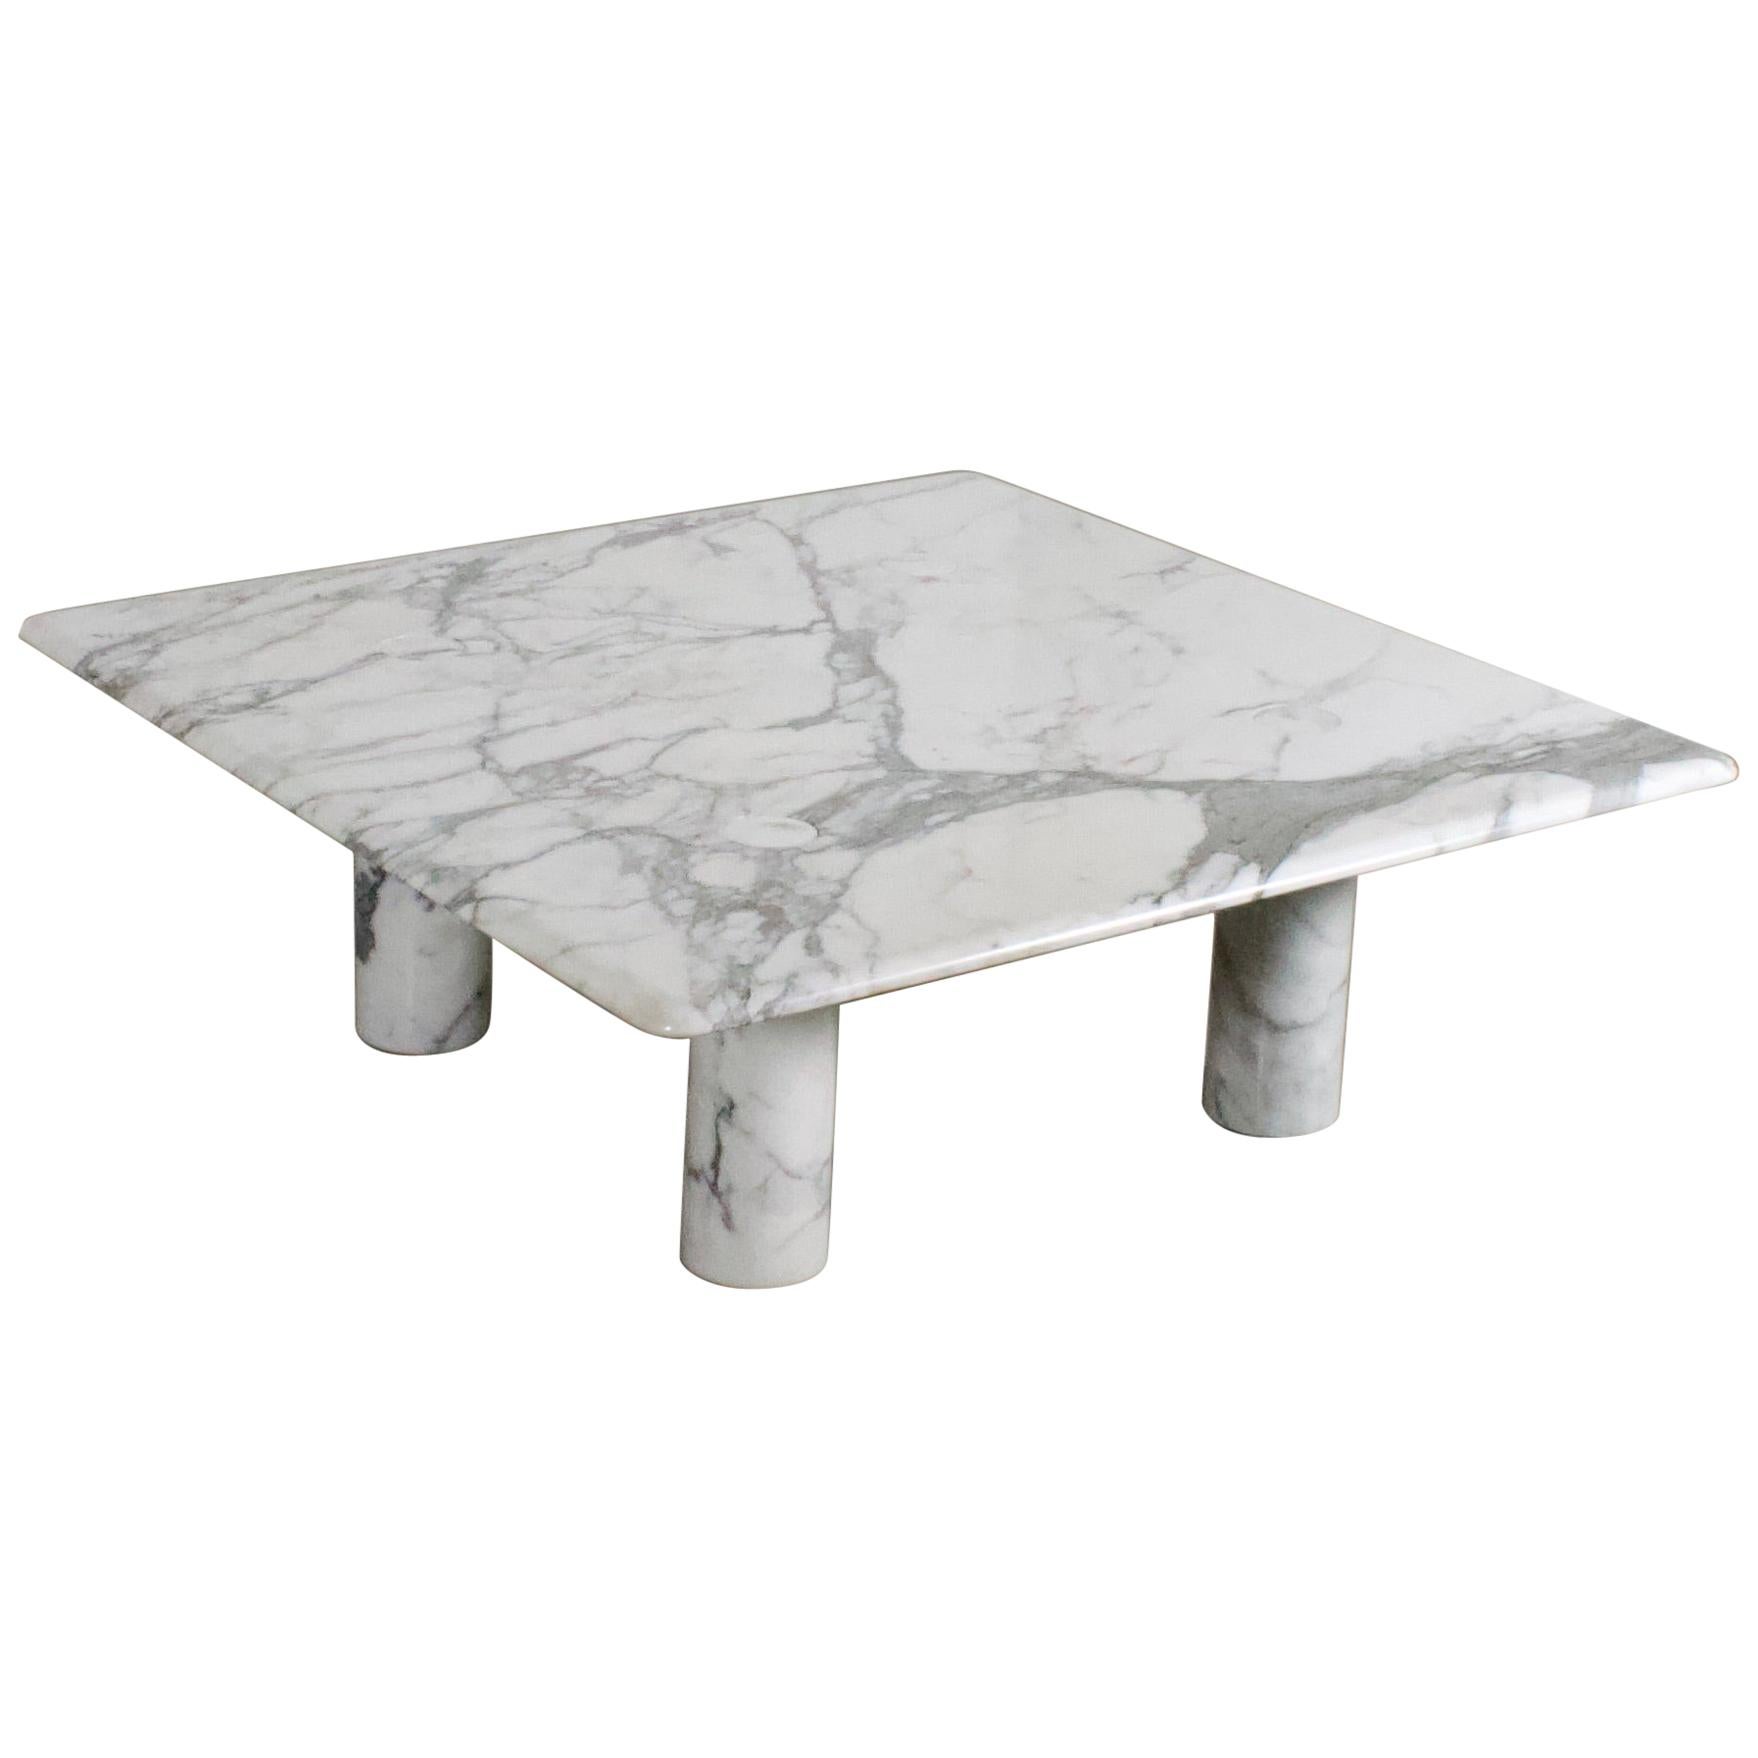 Large Angelo Mangiarotti Carrara Marble Coffee Table for Up&Up, Italy, 1970s